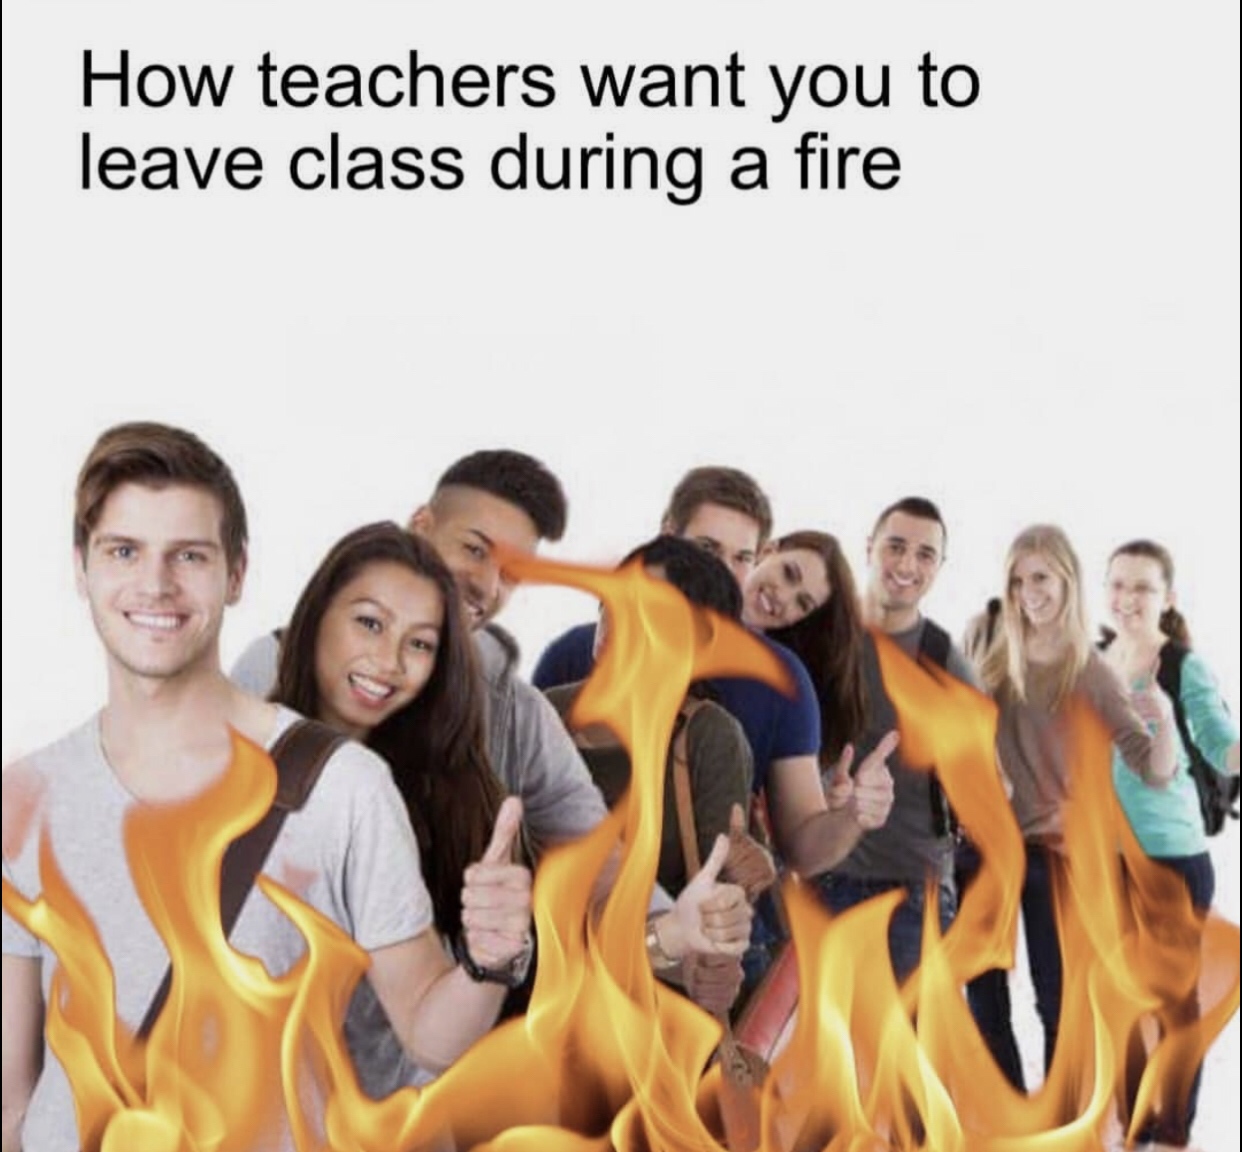 teachers want you to leave class during - How teachers want you to leave class during a fire